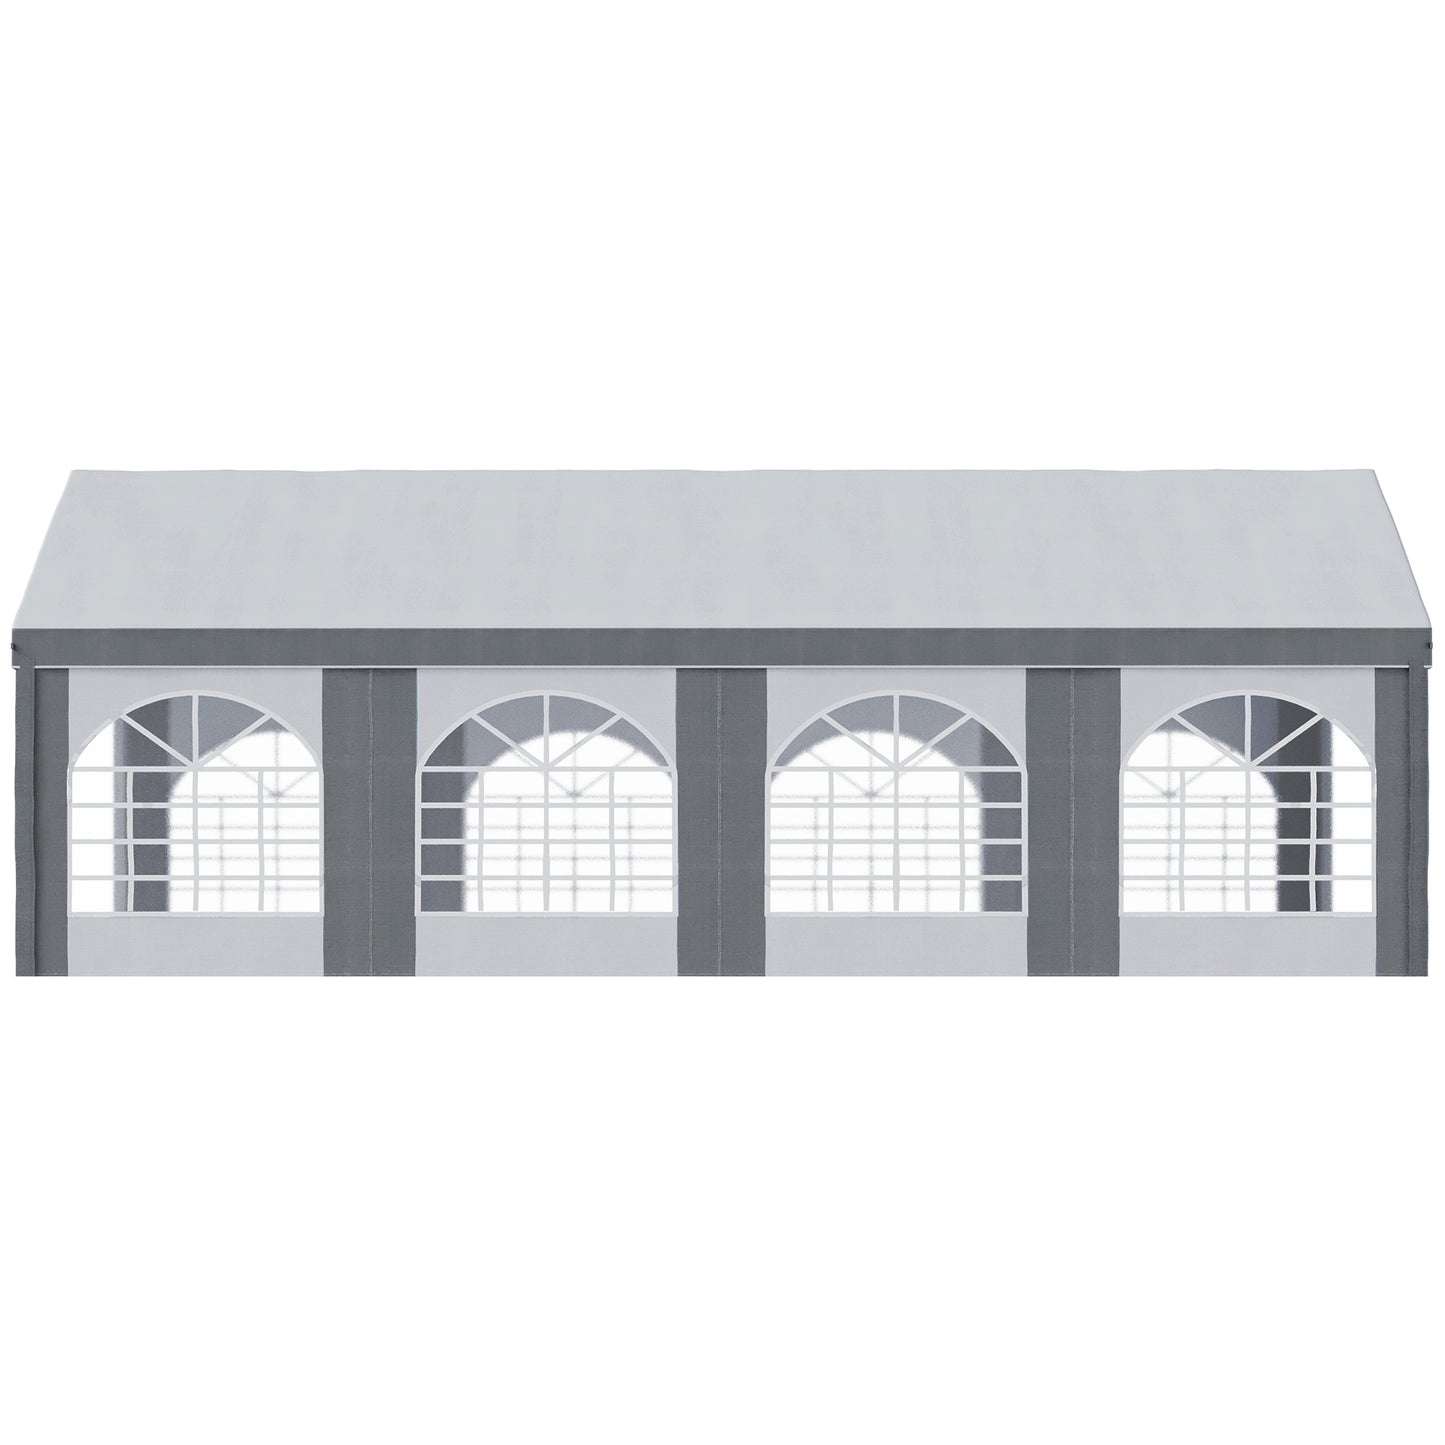 Outsunny 8 x 4m Galvanised Party Tent, Marquee Gazebo with Sides, Eight Windows and Double Doors, for Parties, Wedding and Events